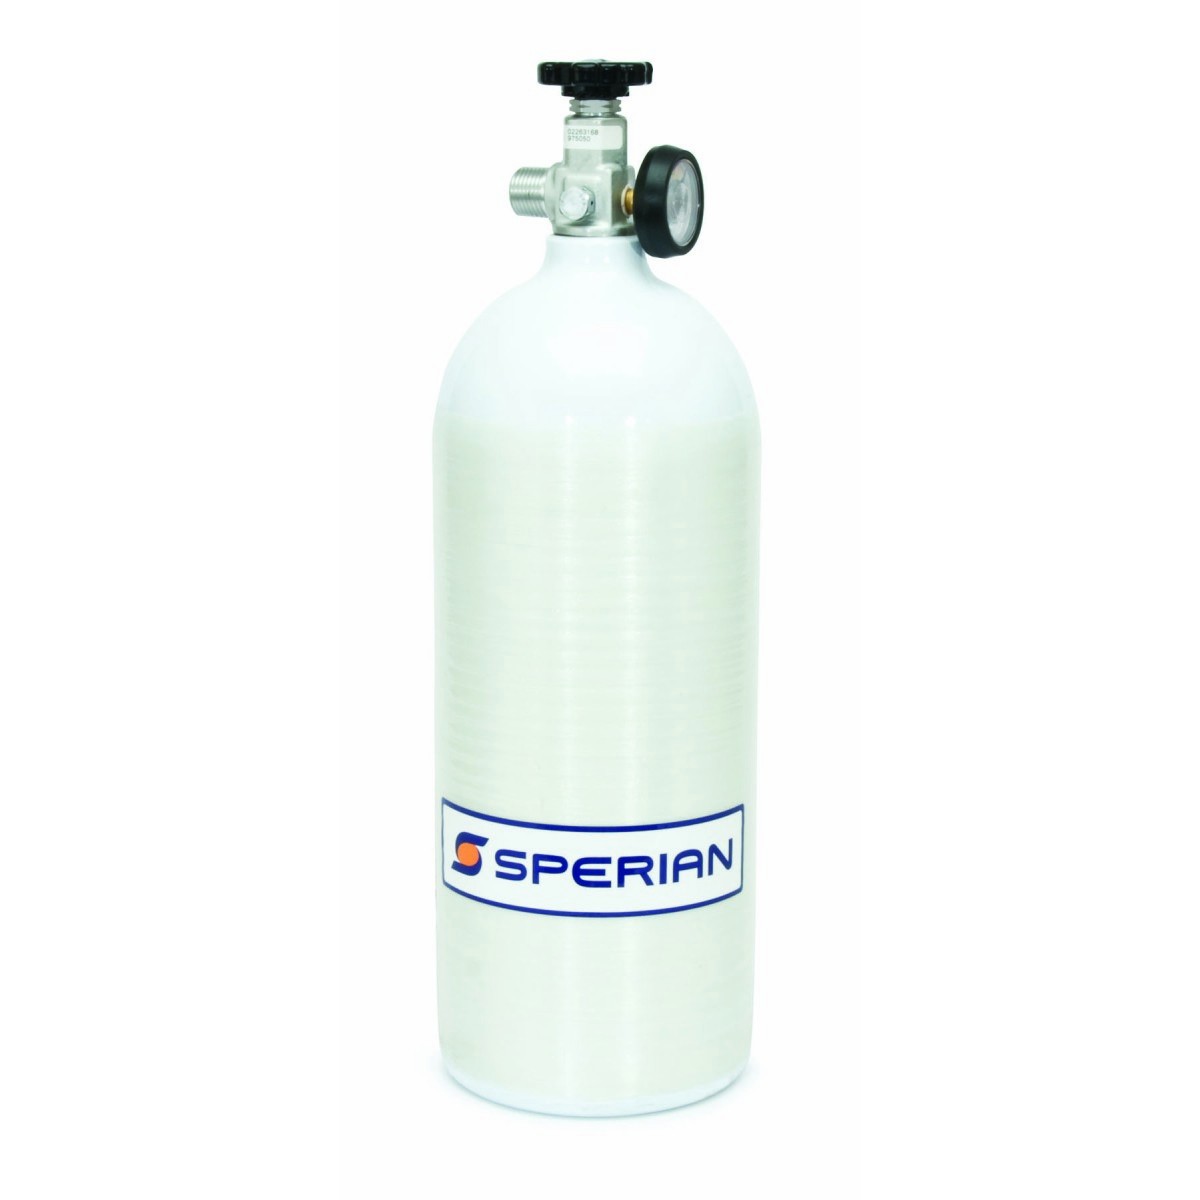 Honeywell 2216 psig Spare Cylinder (For Escape Breathing Apparatus)